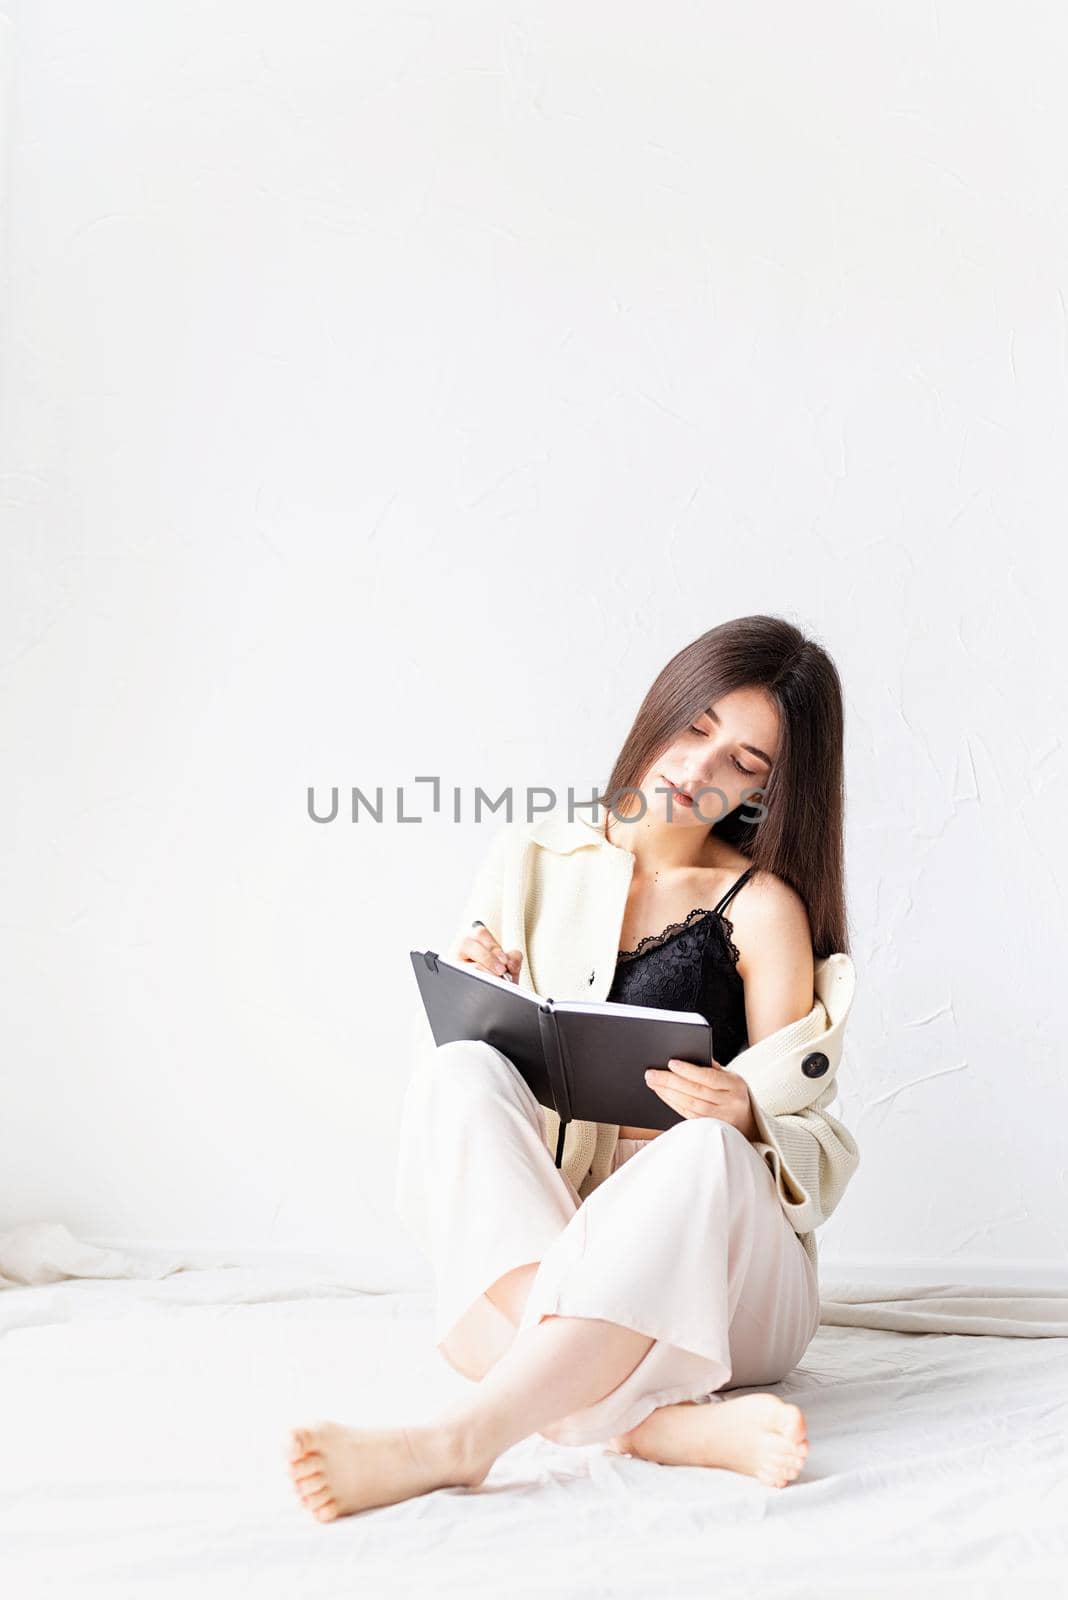 Beautiful woman in comfy home clothes writing notes sitting on the floor by Desperada